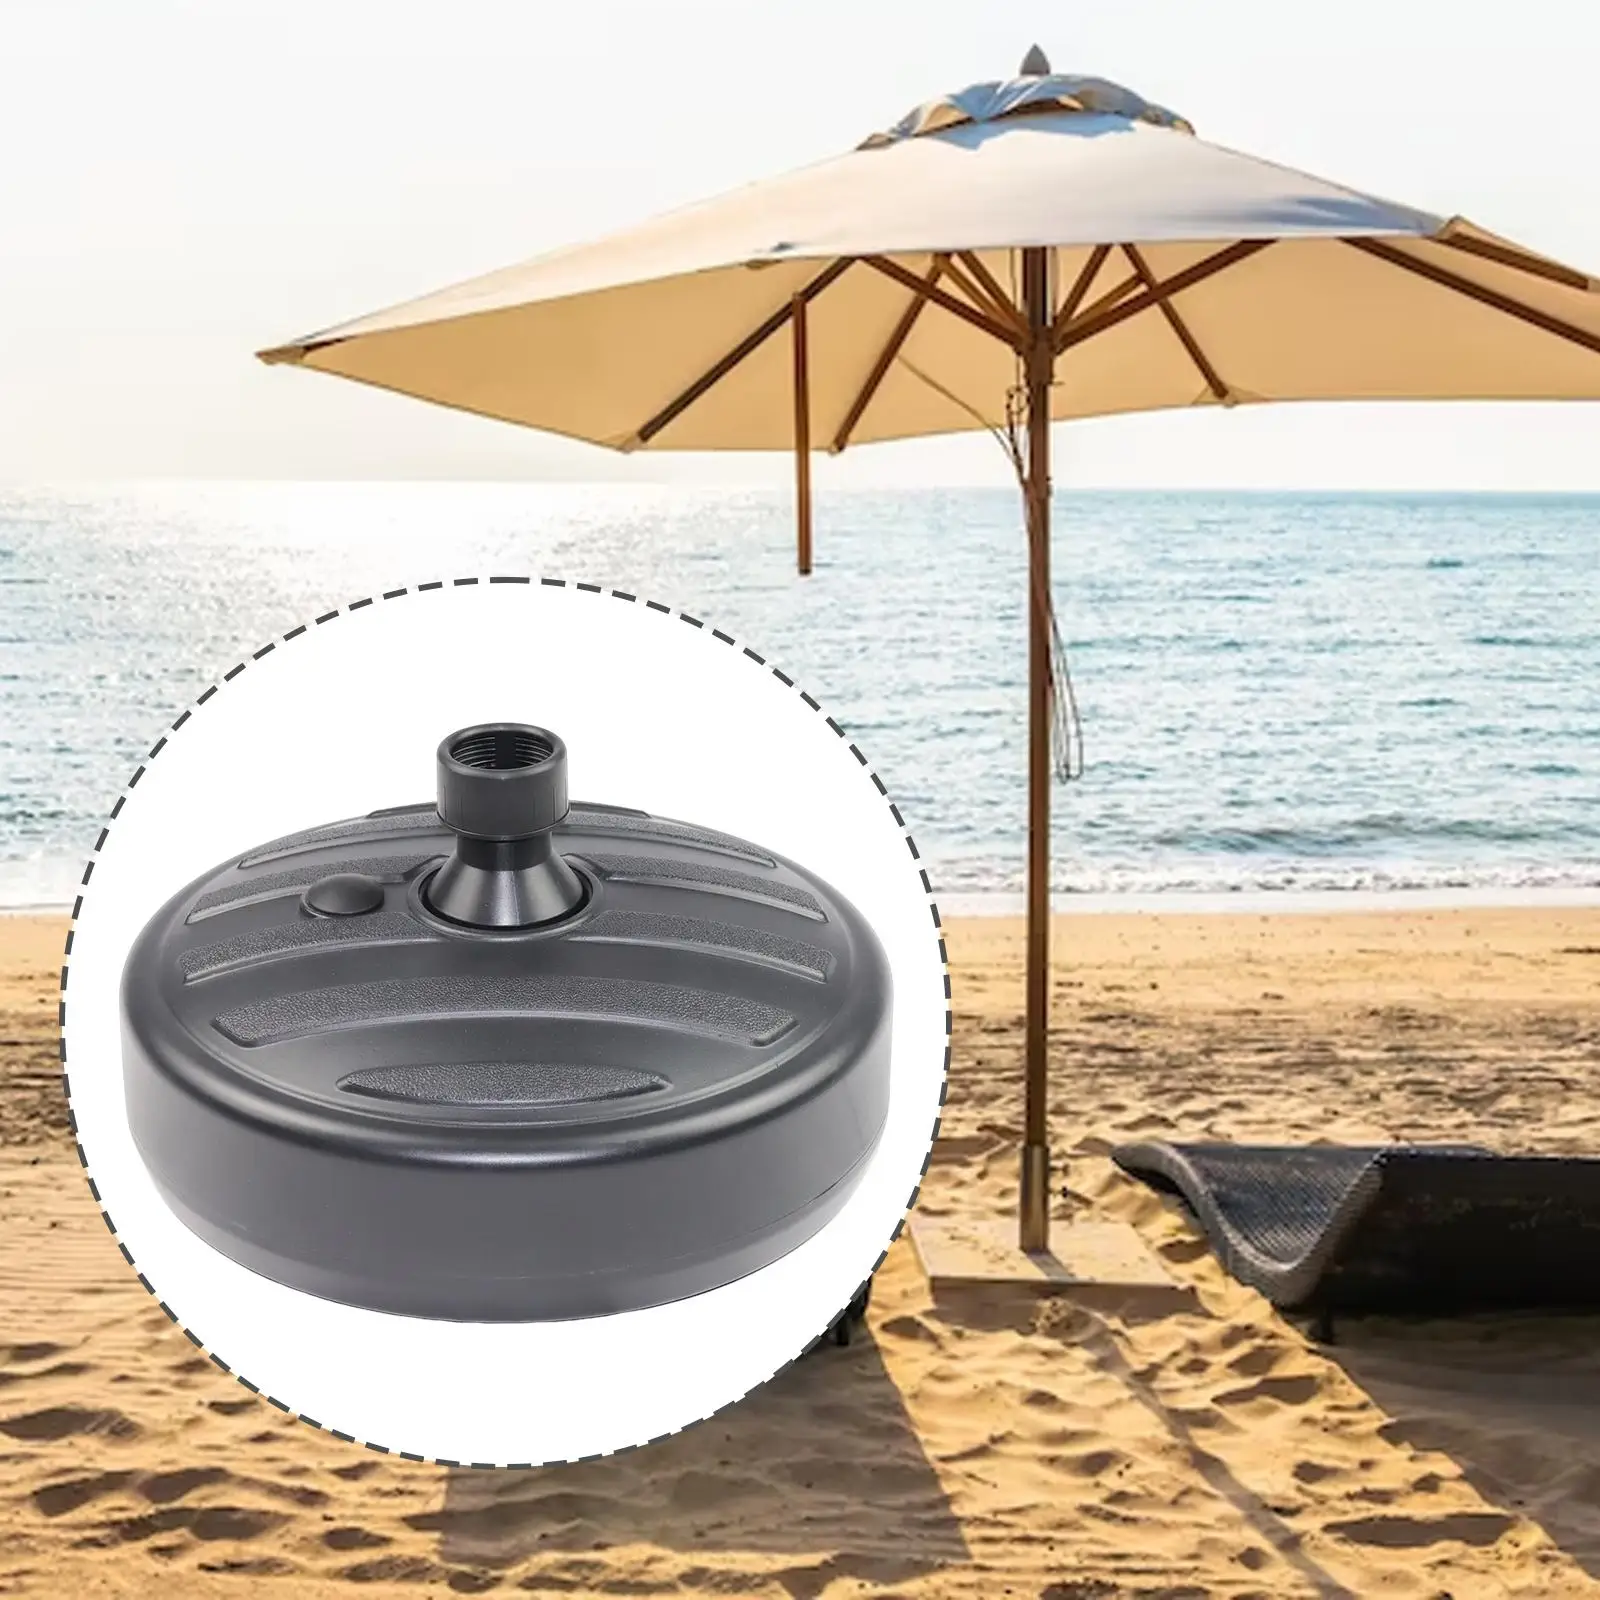 Parasol Holder Heavy Duty Weight Replacement Round Umbrella Base 13L Garden Parasol Base for Beach Outdoor Poolside Deck Lawn